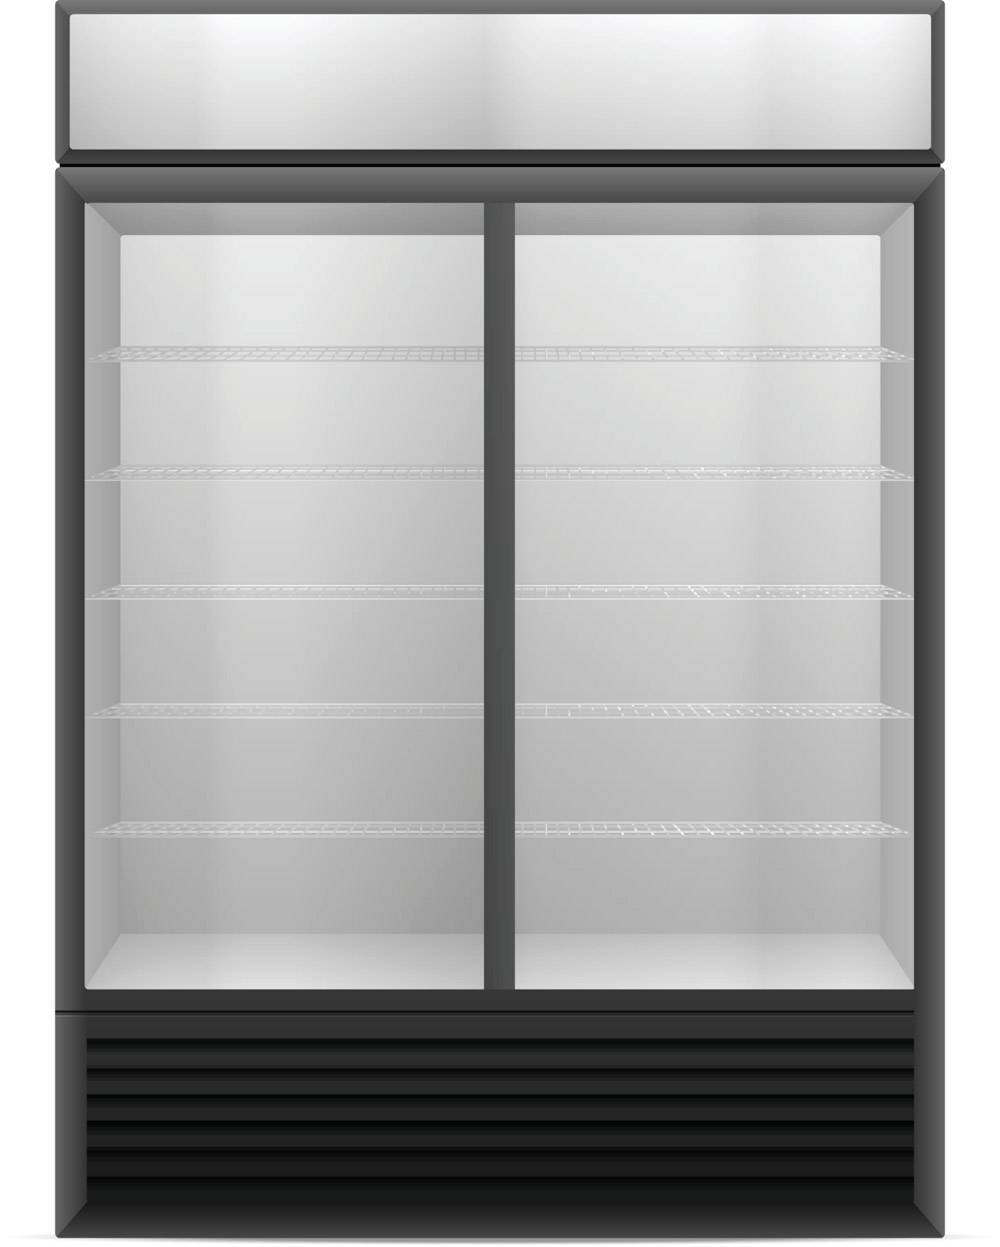 Commercial display refrigerator - Ames Refrigeration in Lake County, IL